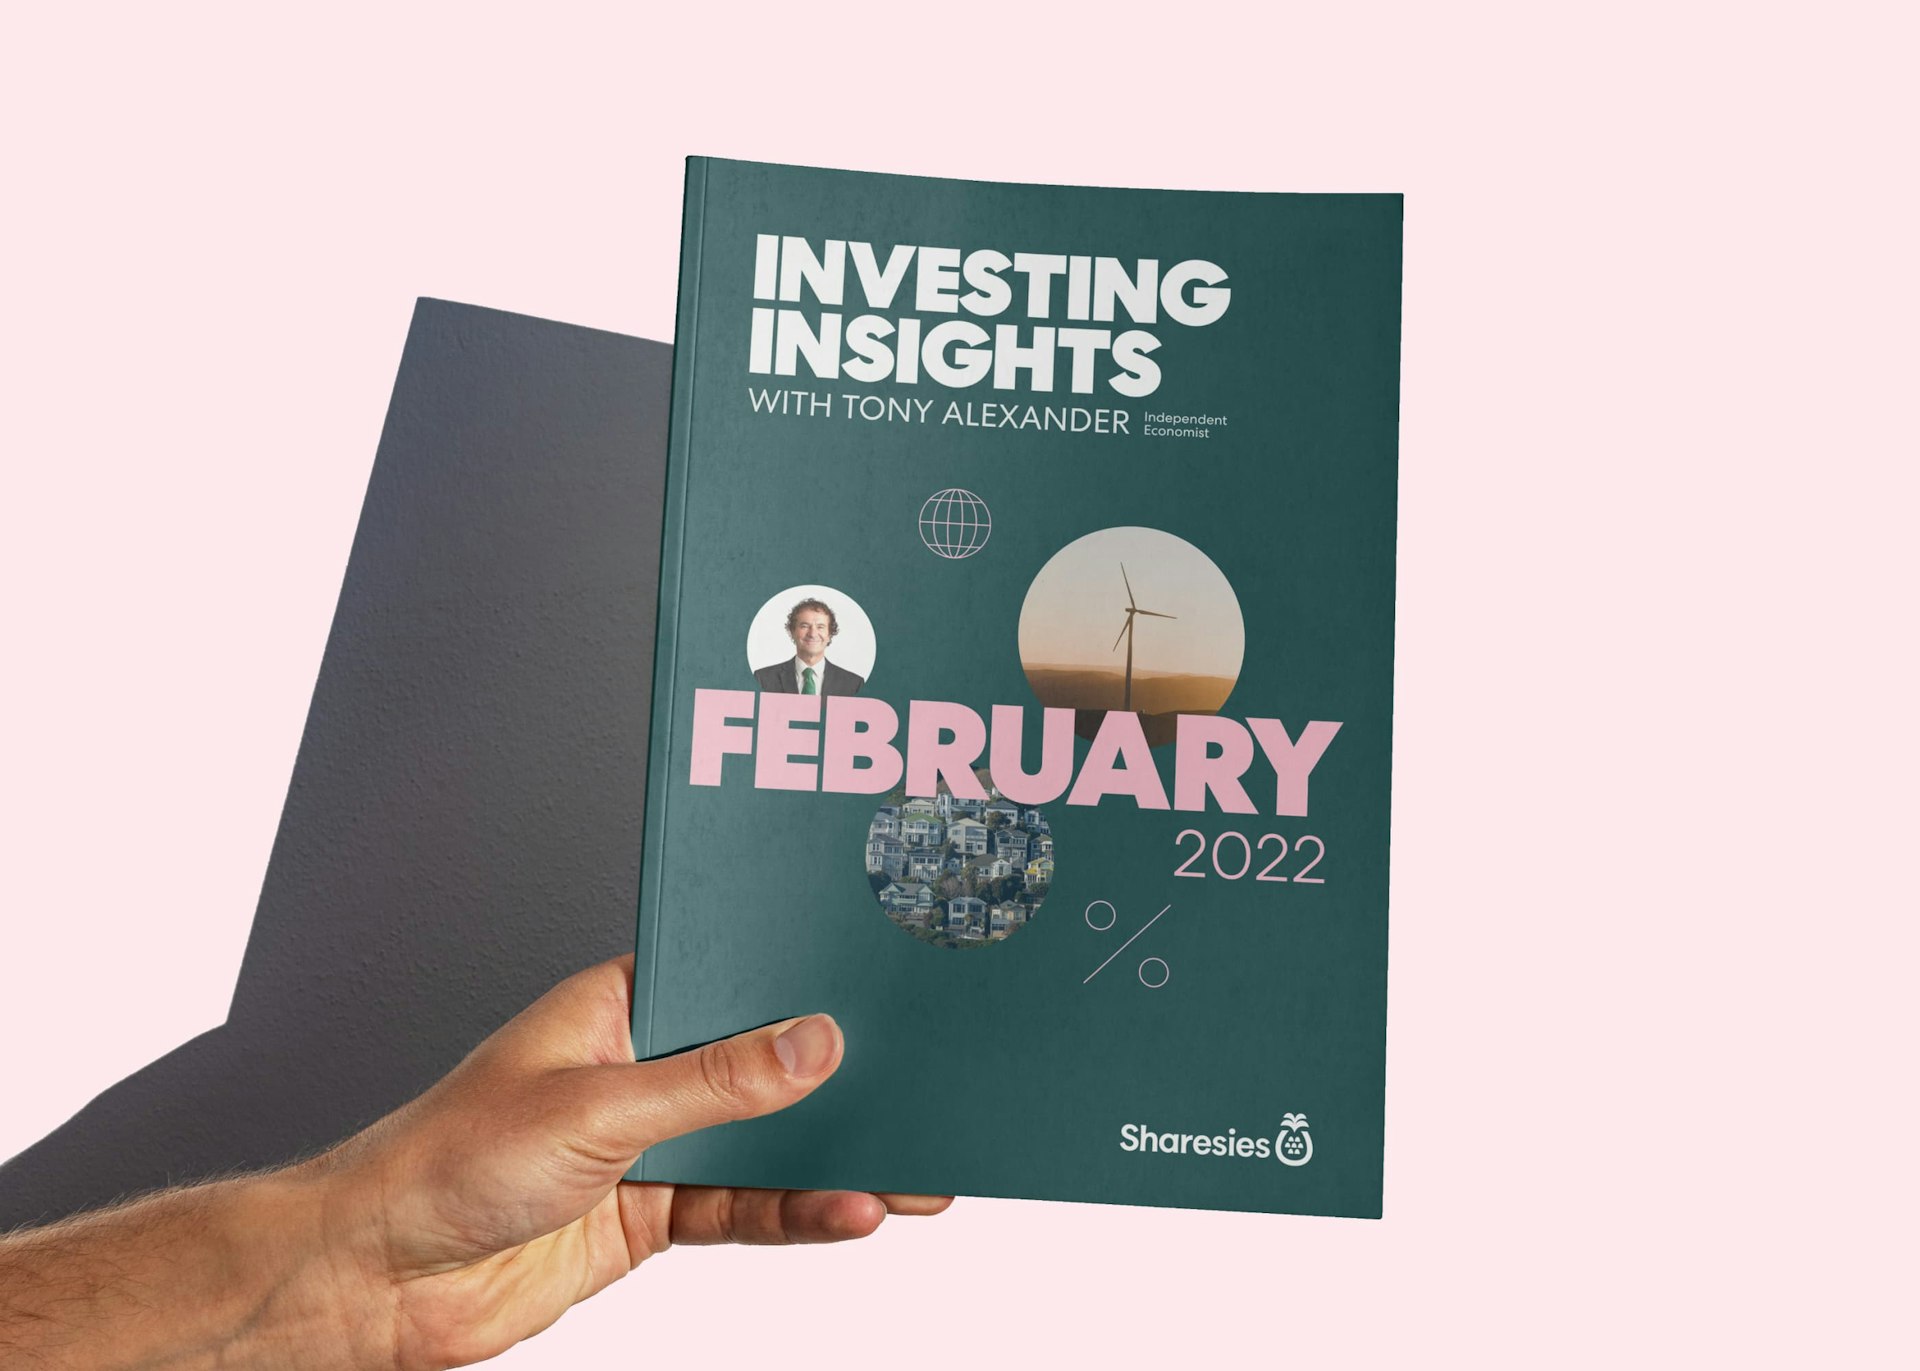 The Investing Insights report is held in a hand.